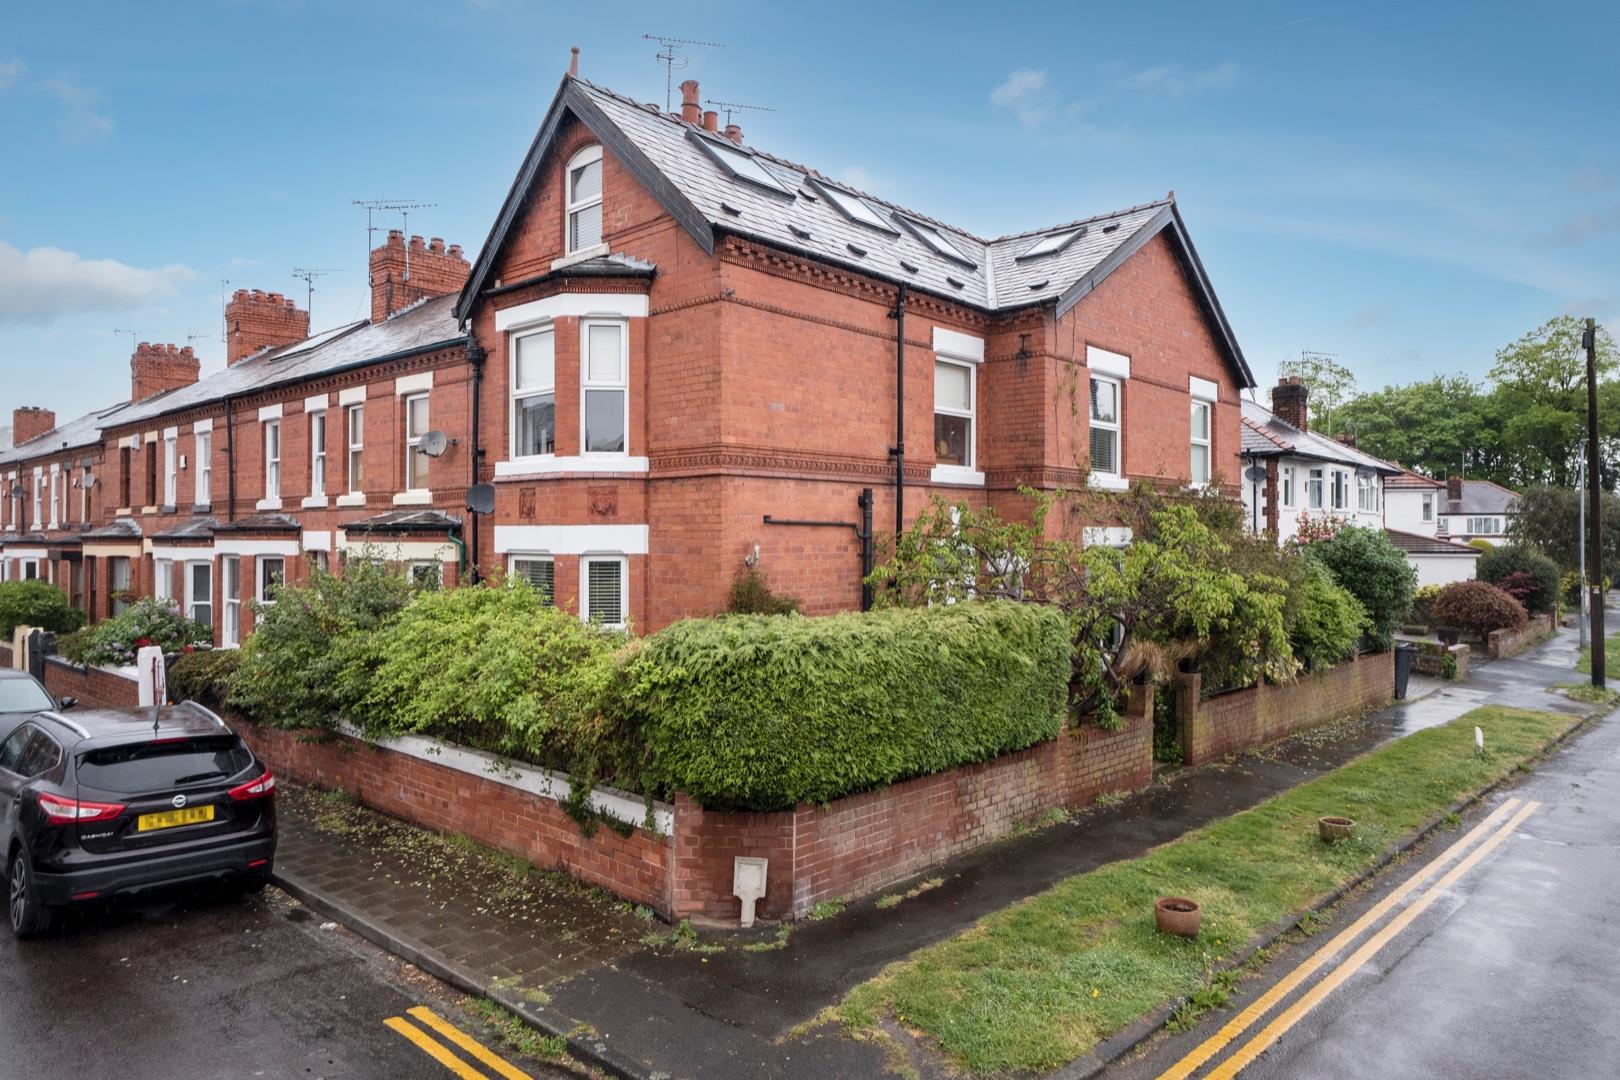 4 bedroom  End Terrace House for Sale in Hoole